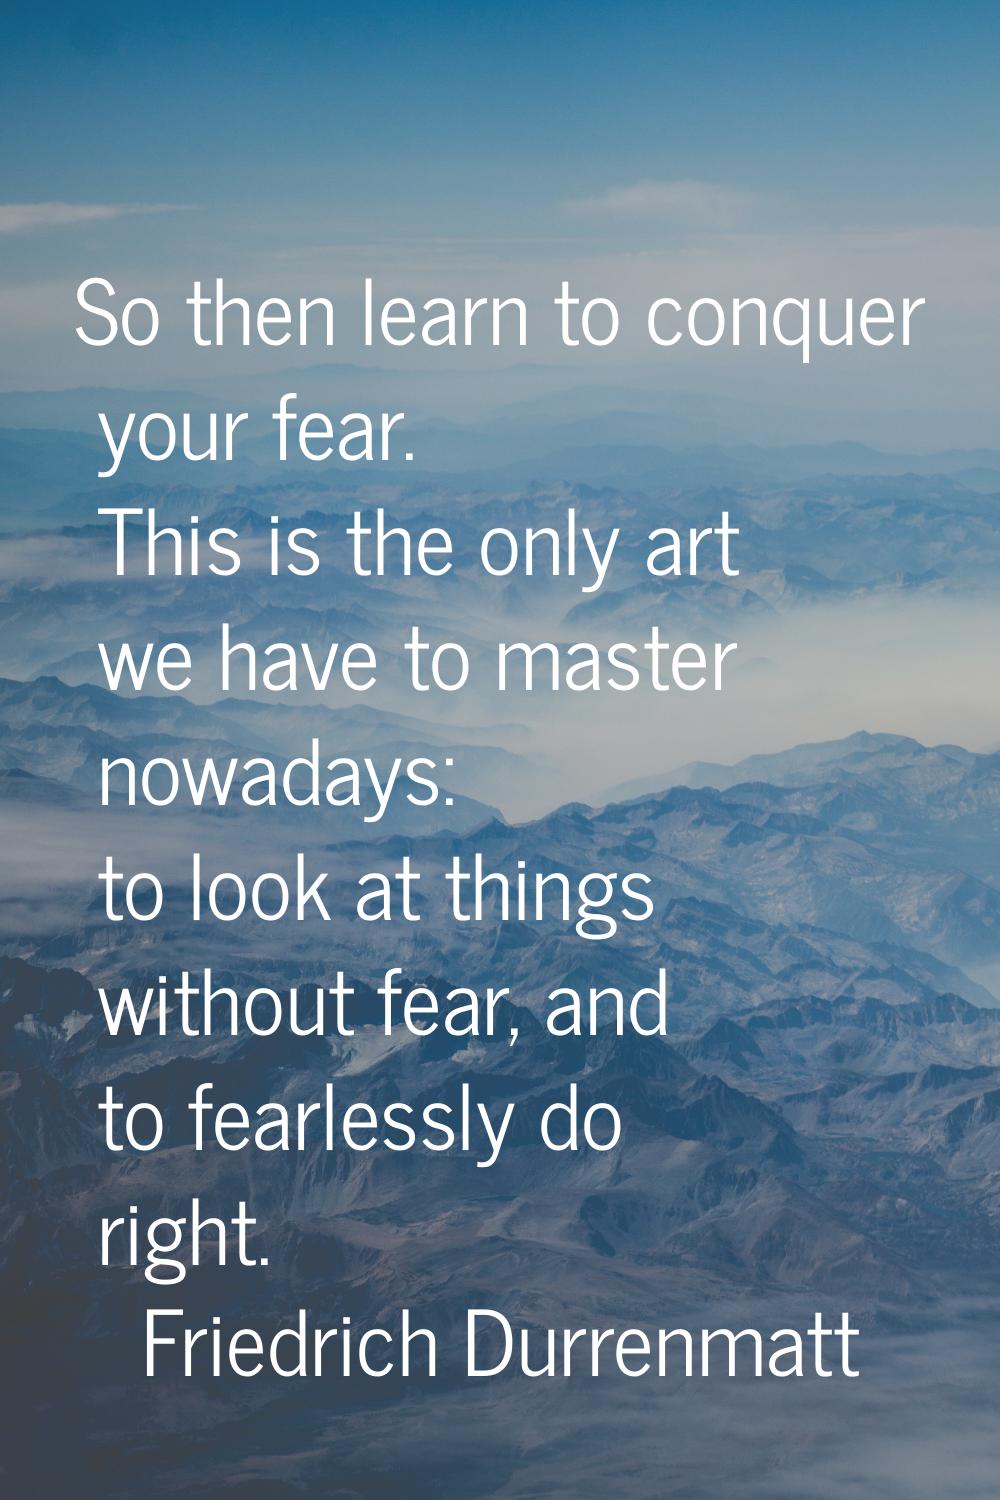 So then learn to conquer your fear. This is the only art we have to master nowadays: to look at thi